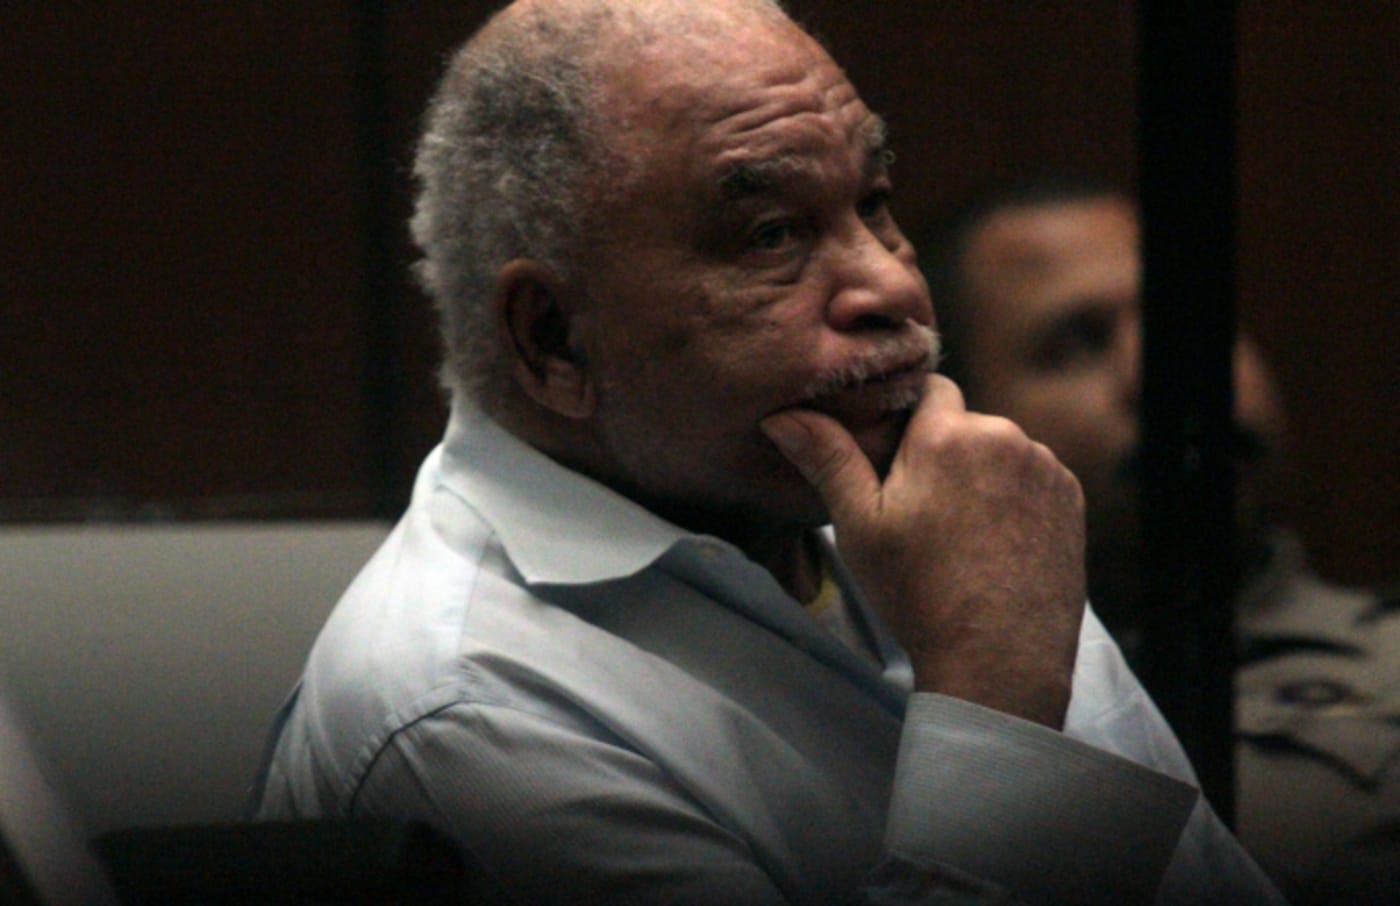 Samuel Little was indicted on charges that he murder